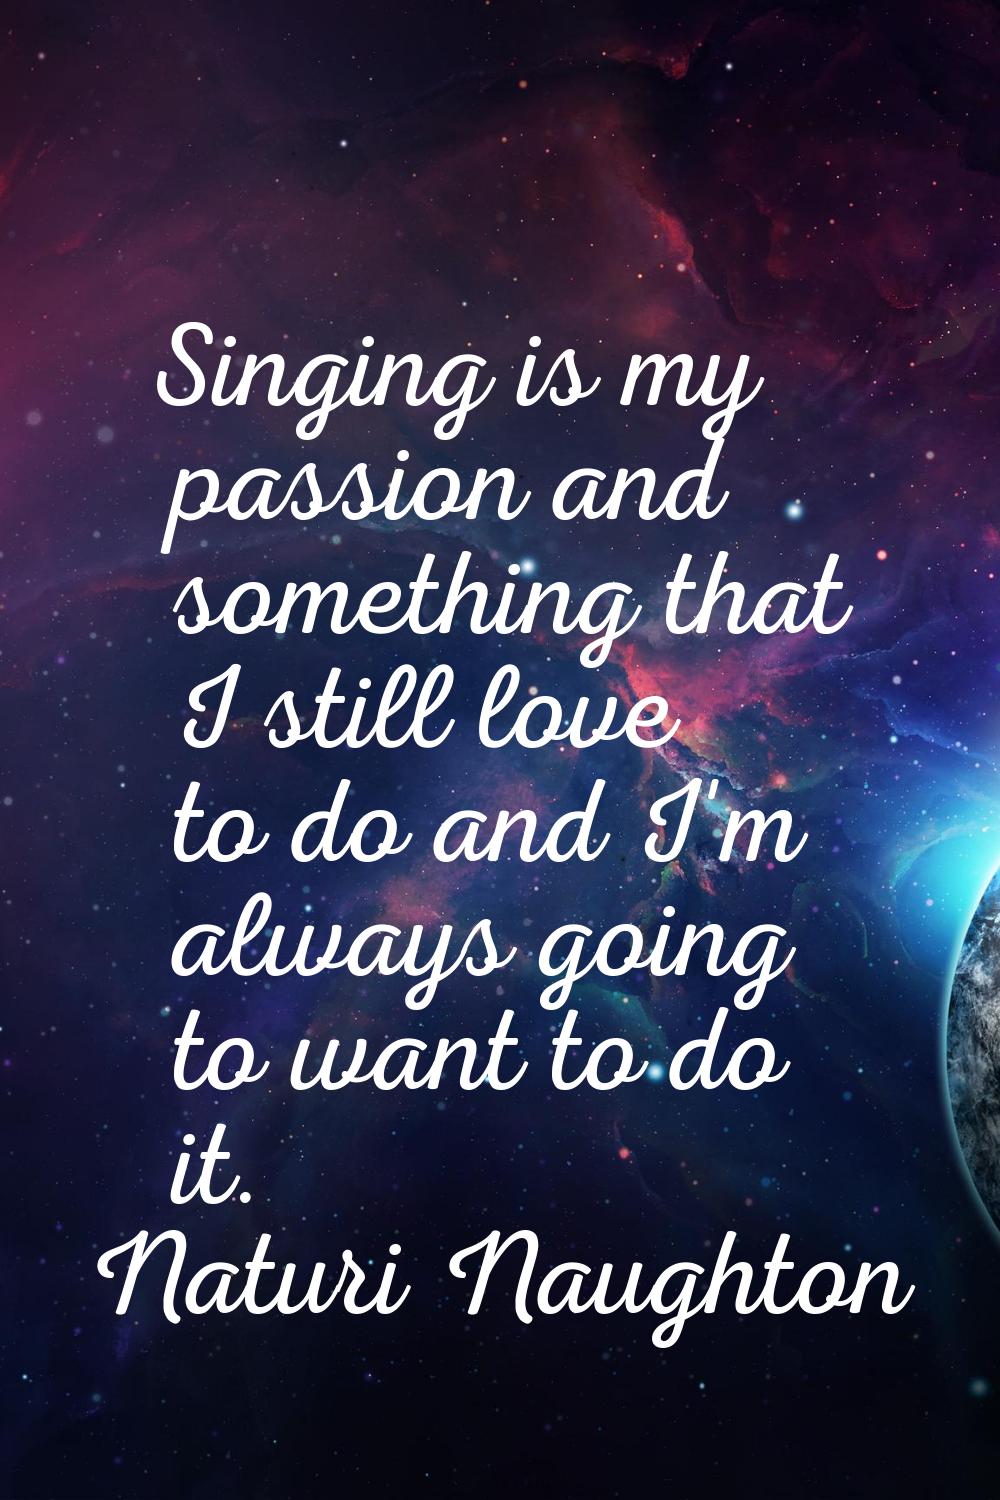 Singing is my passion and something that I still love to do and I'm always going to want to do it.